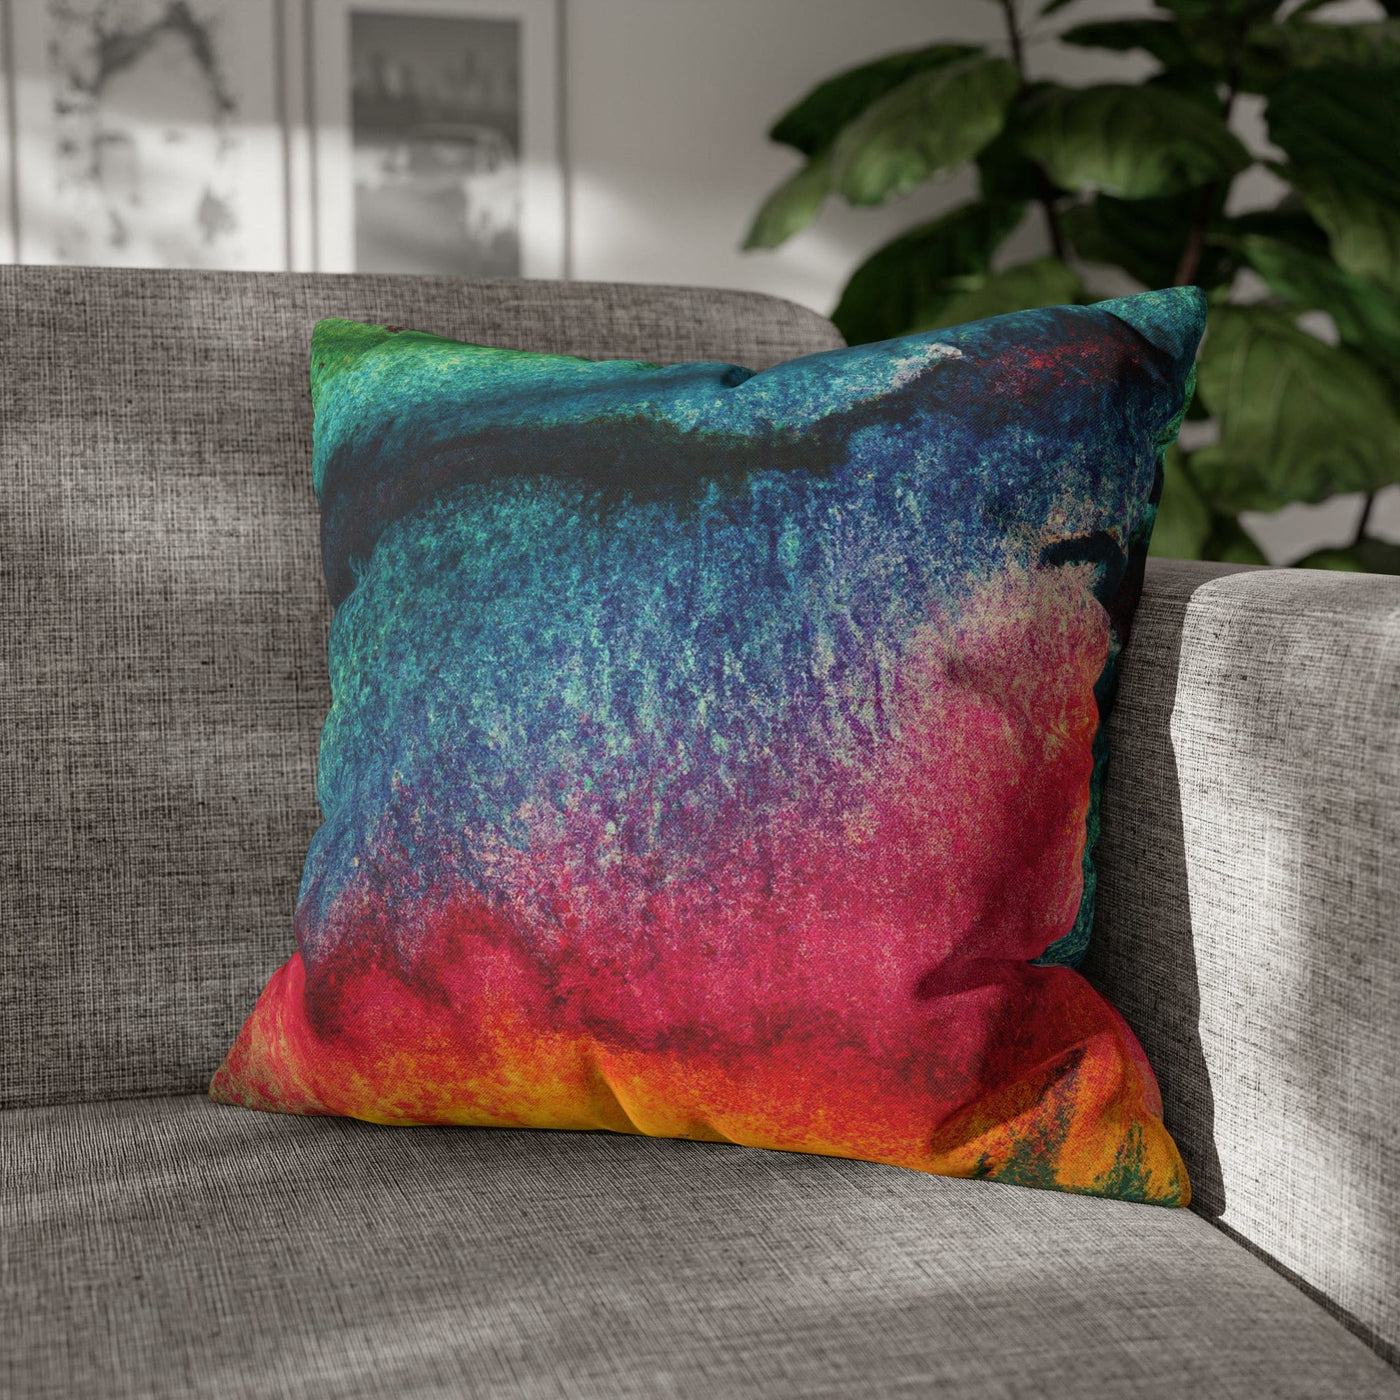 Decorative Throw Pillow Covers With Zipper - Set Of 2 Multicolor Watercolor